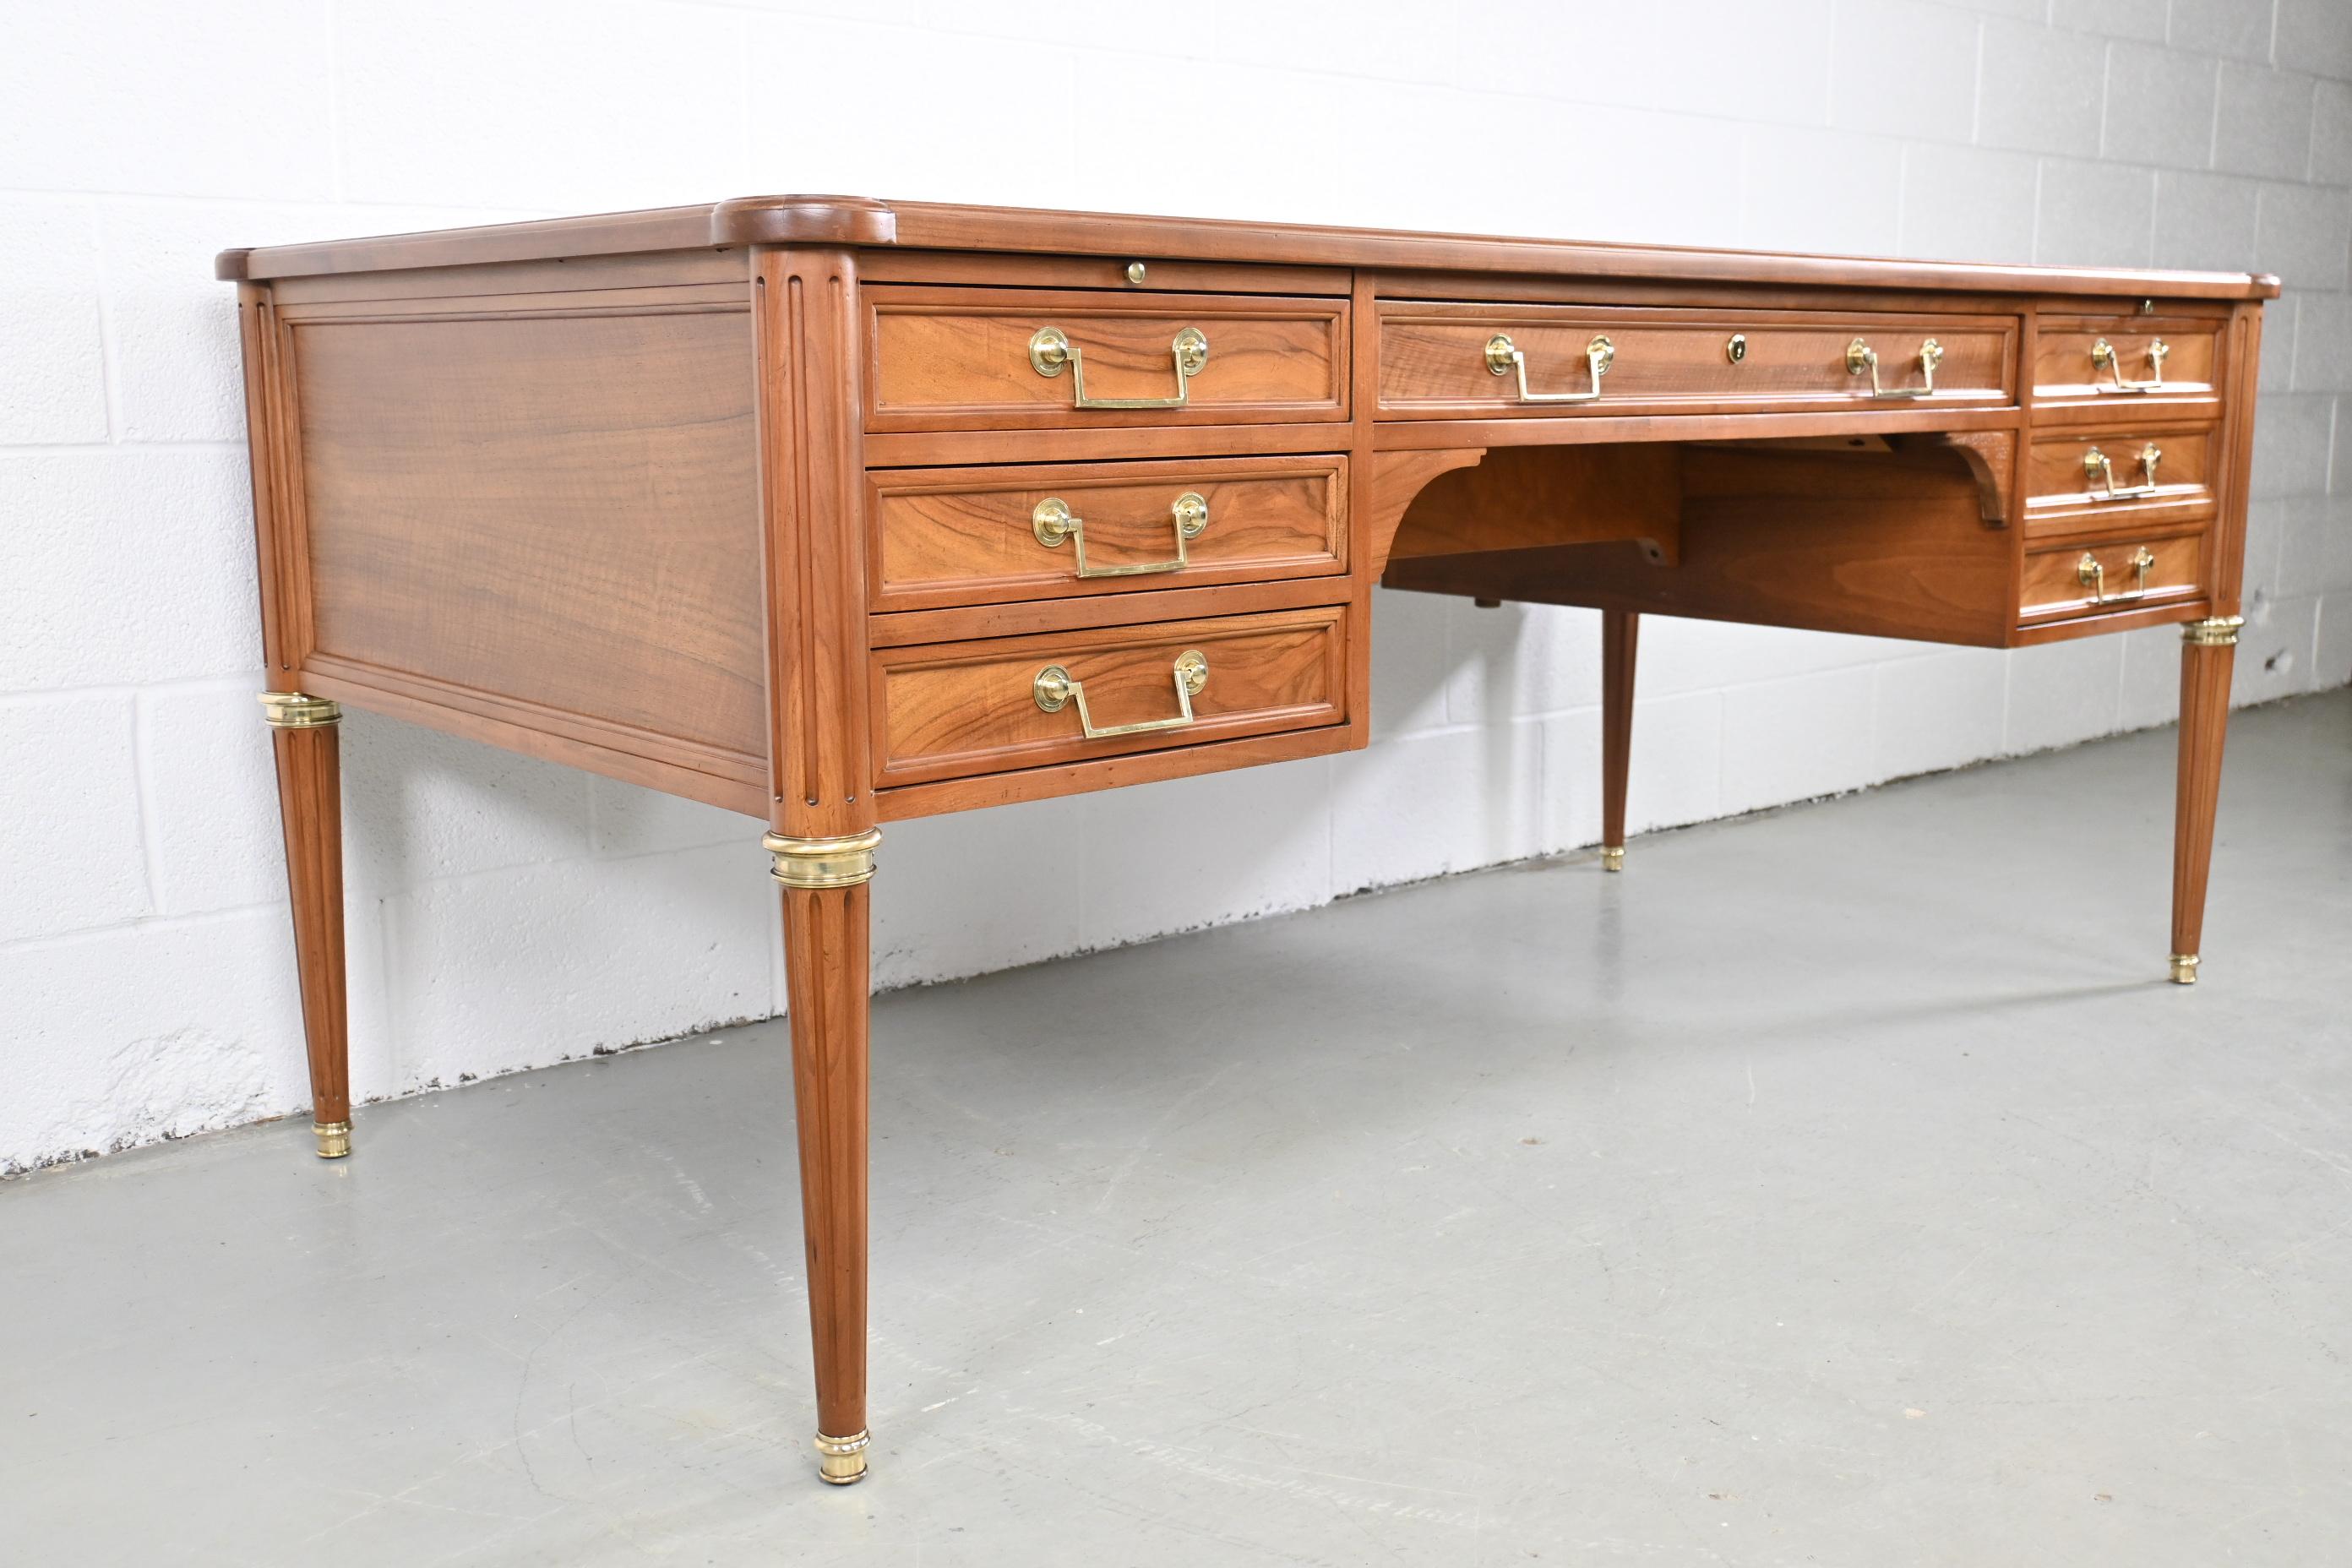 Baker Furniture French Louis XVI style executive desk

Baker Furniture, USA, 1980s

Measures: 72.88 Wide x 35 Deep x 30.18 High.

Louis XVI style walnut and cherry executive desk with five drawers as well as a three pull out writing shelves.